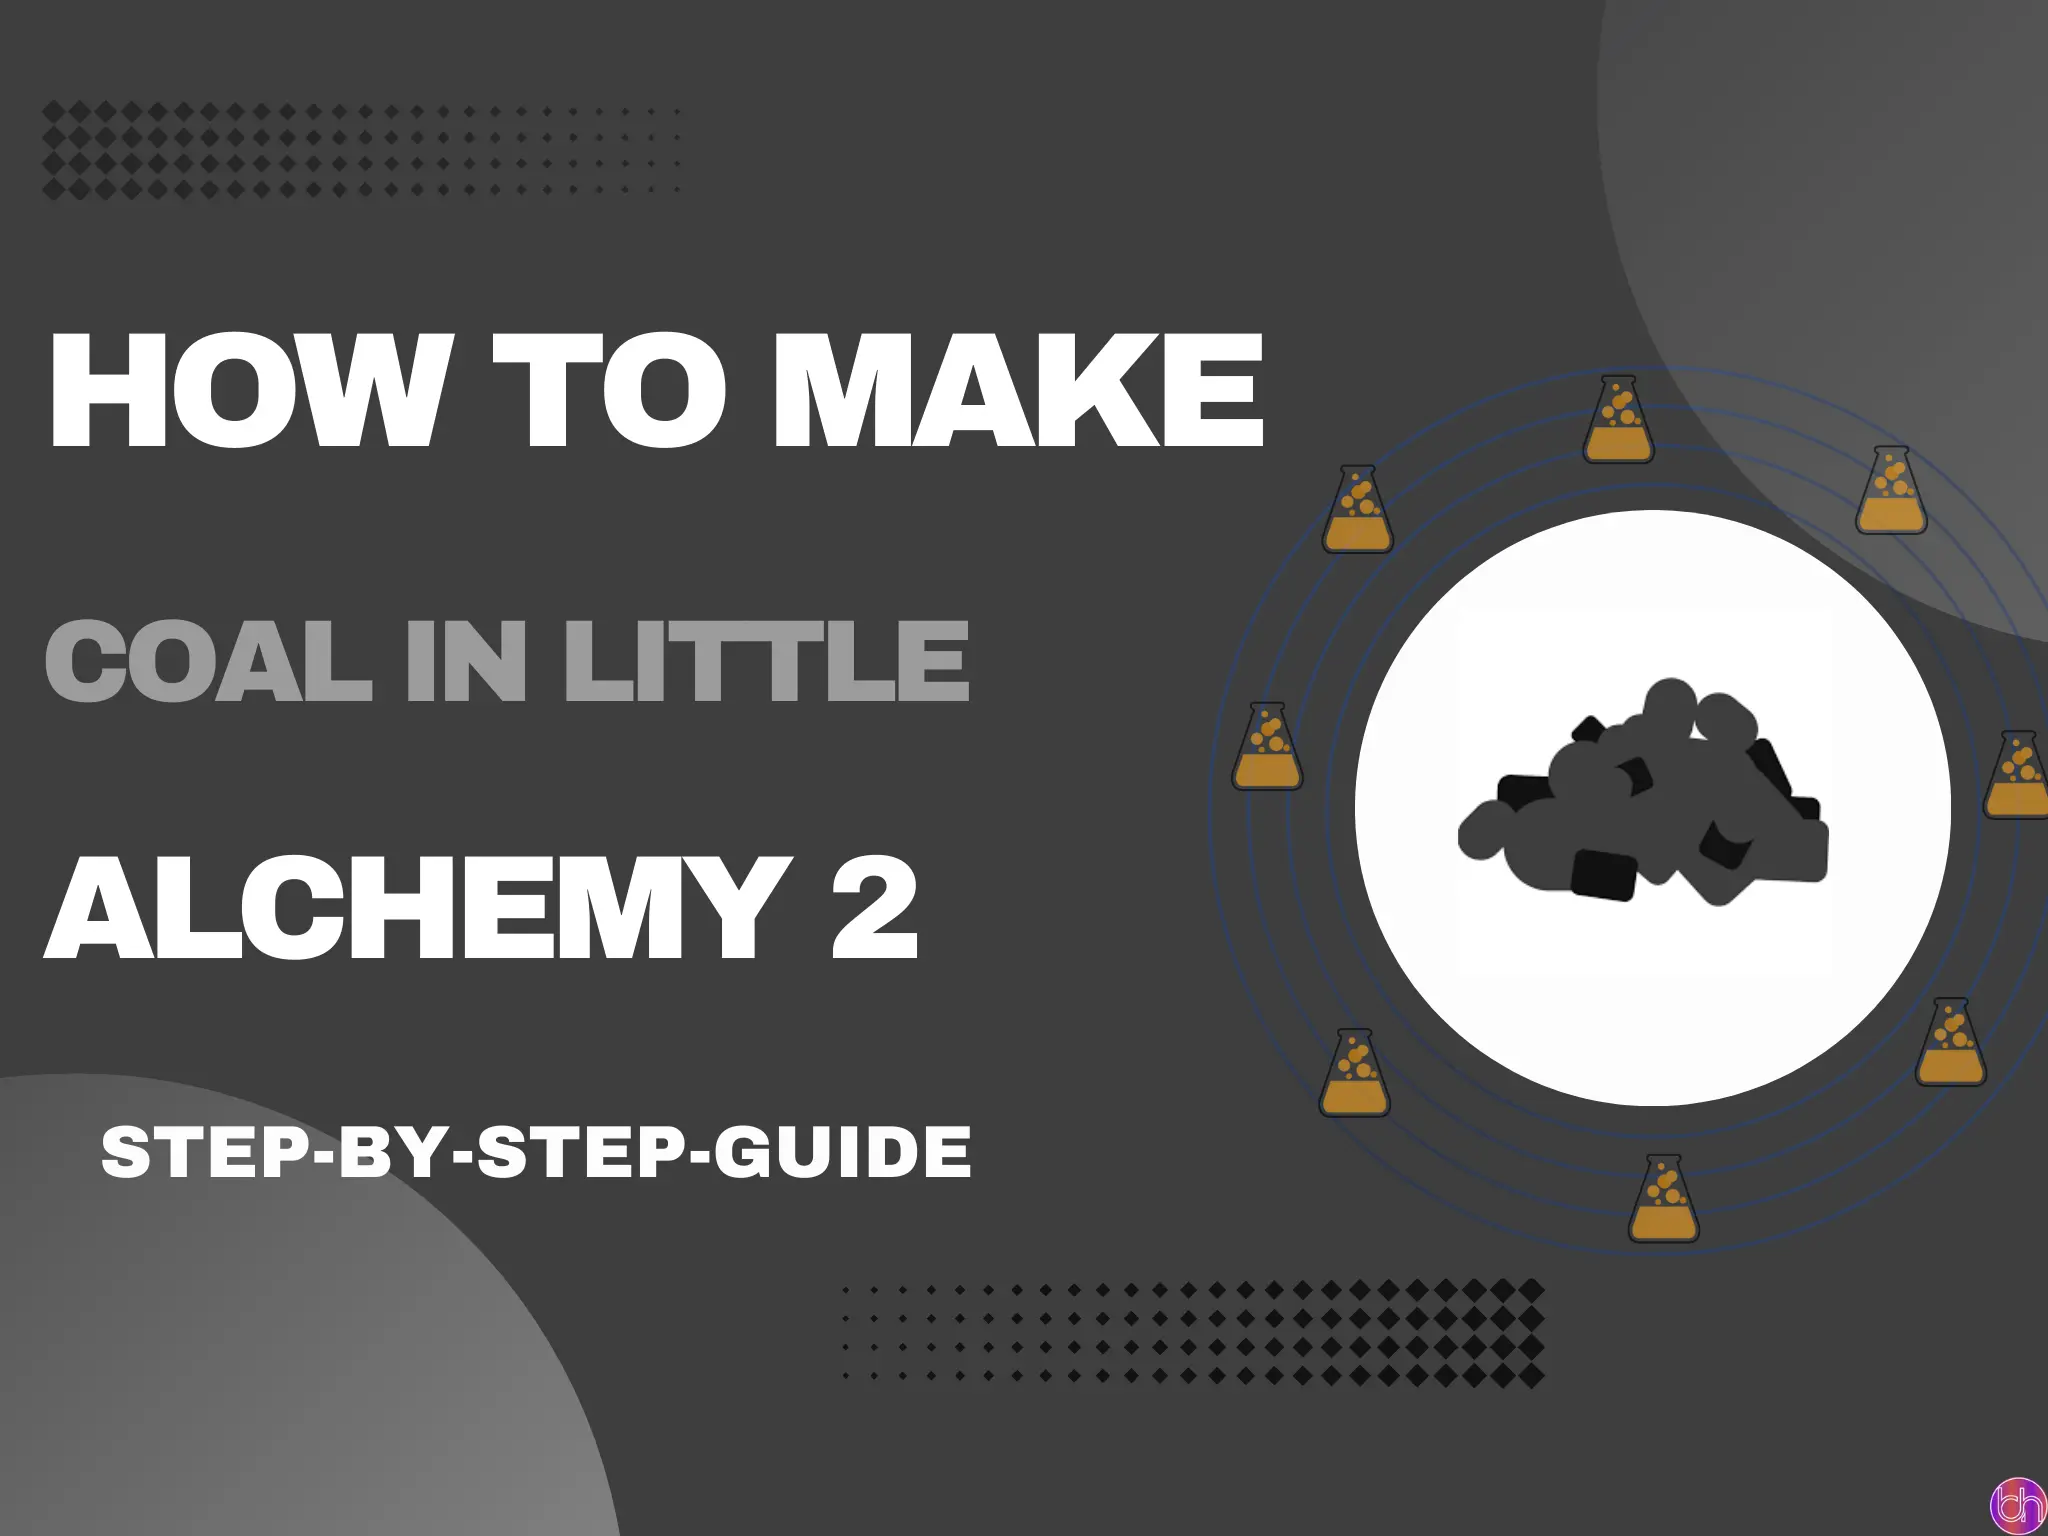 How to make Coal in little alchemy 2